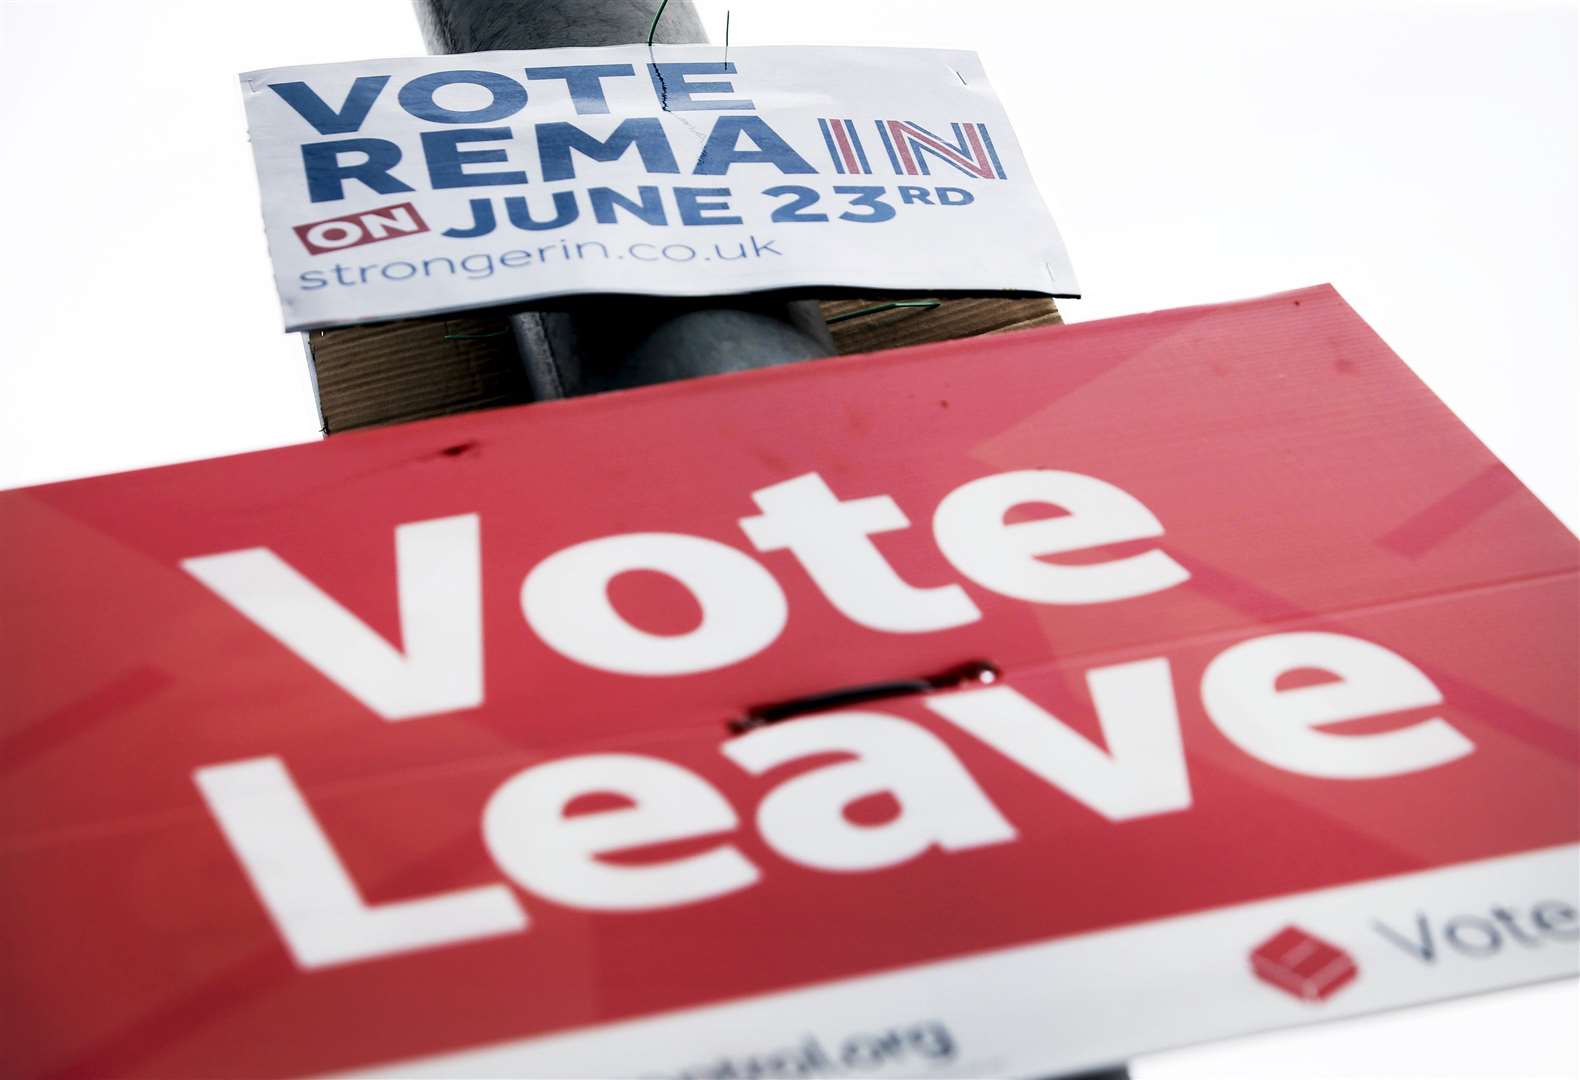 Vote Remain and Vote Leave signs on a lamp post in Leeds (Danny Lawson/PA)